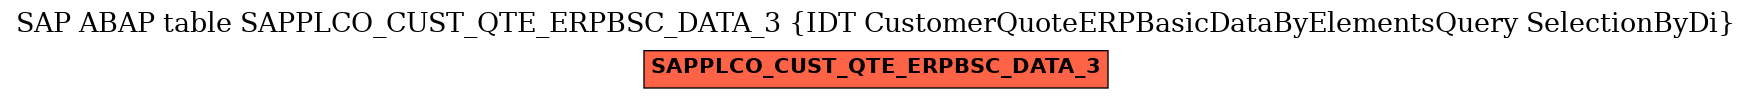 E-R Diagram for table SAPPLCO_CUST_QTE_ERPBSC_DATA_3 (IDT CustomerQuoteERPBasicDataByElementsQuery SelectionByDi)